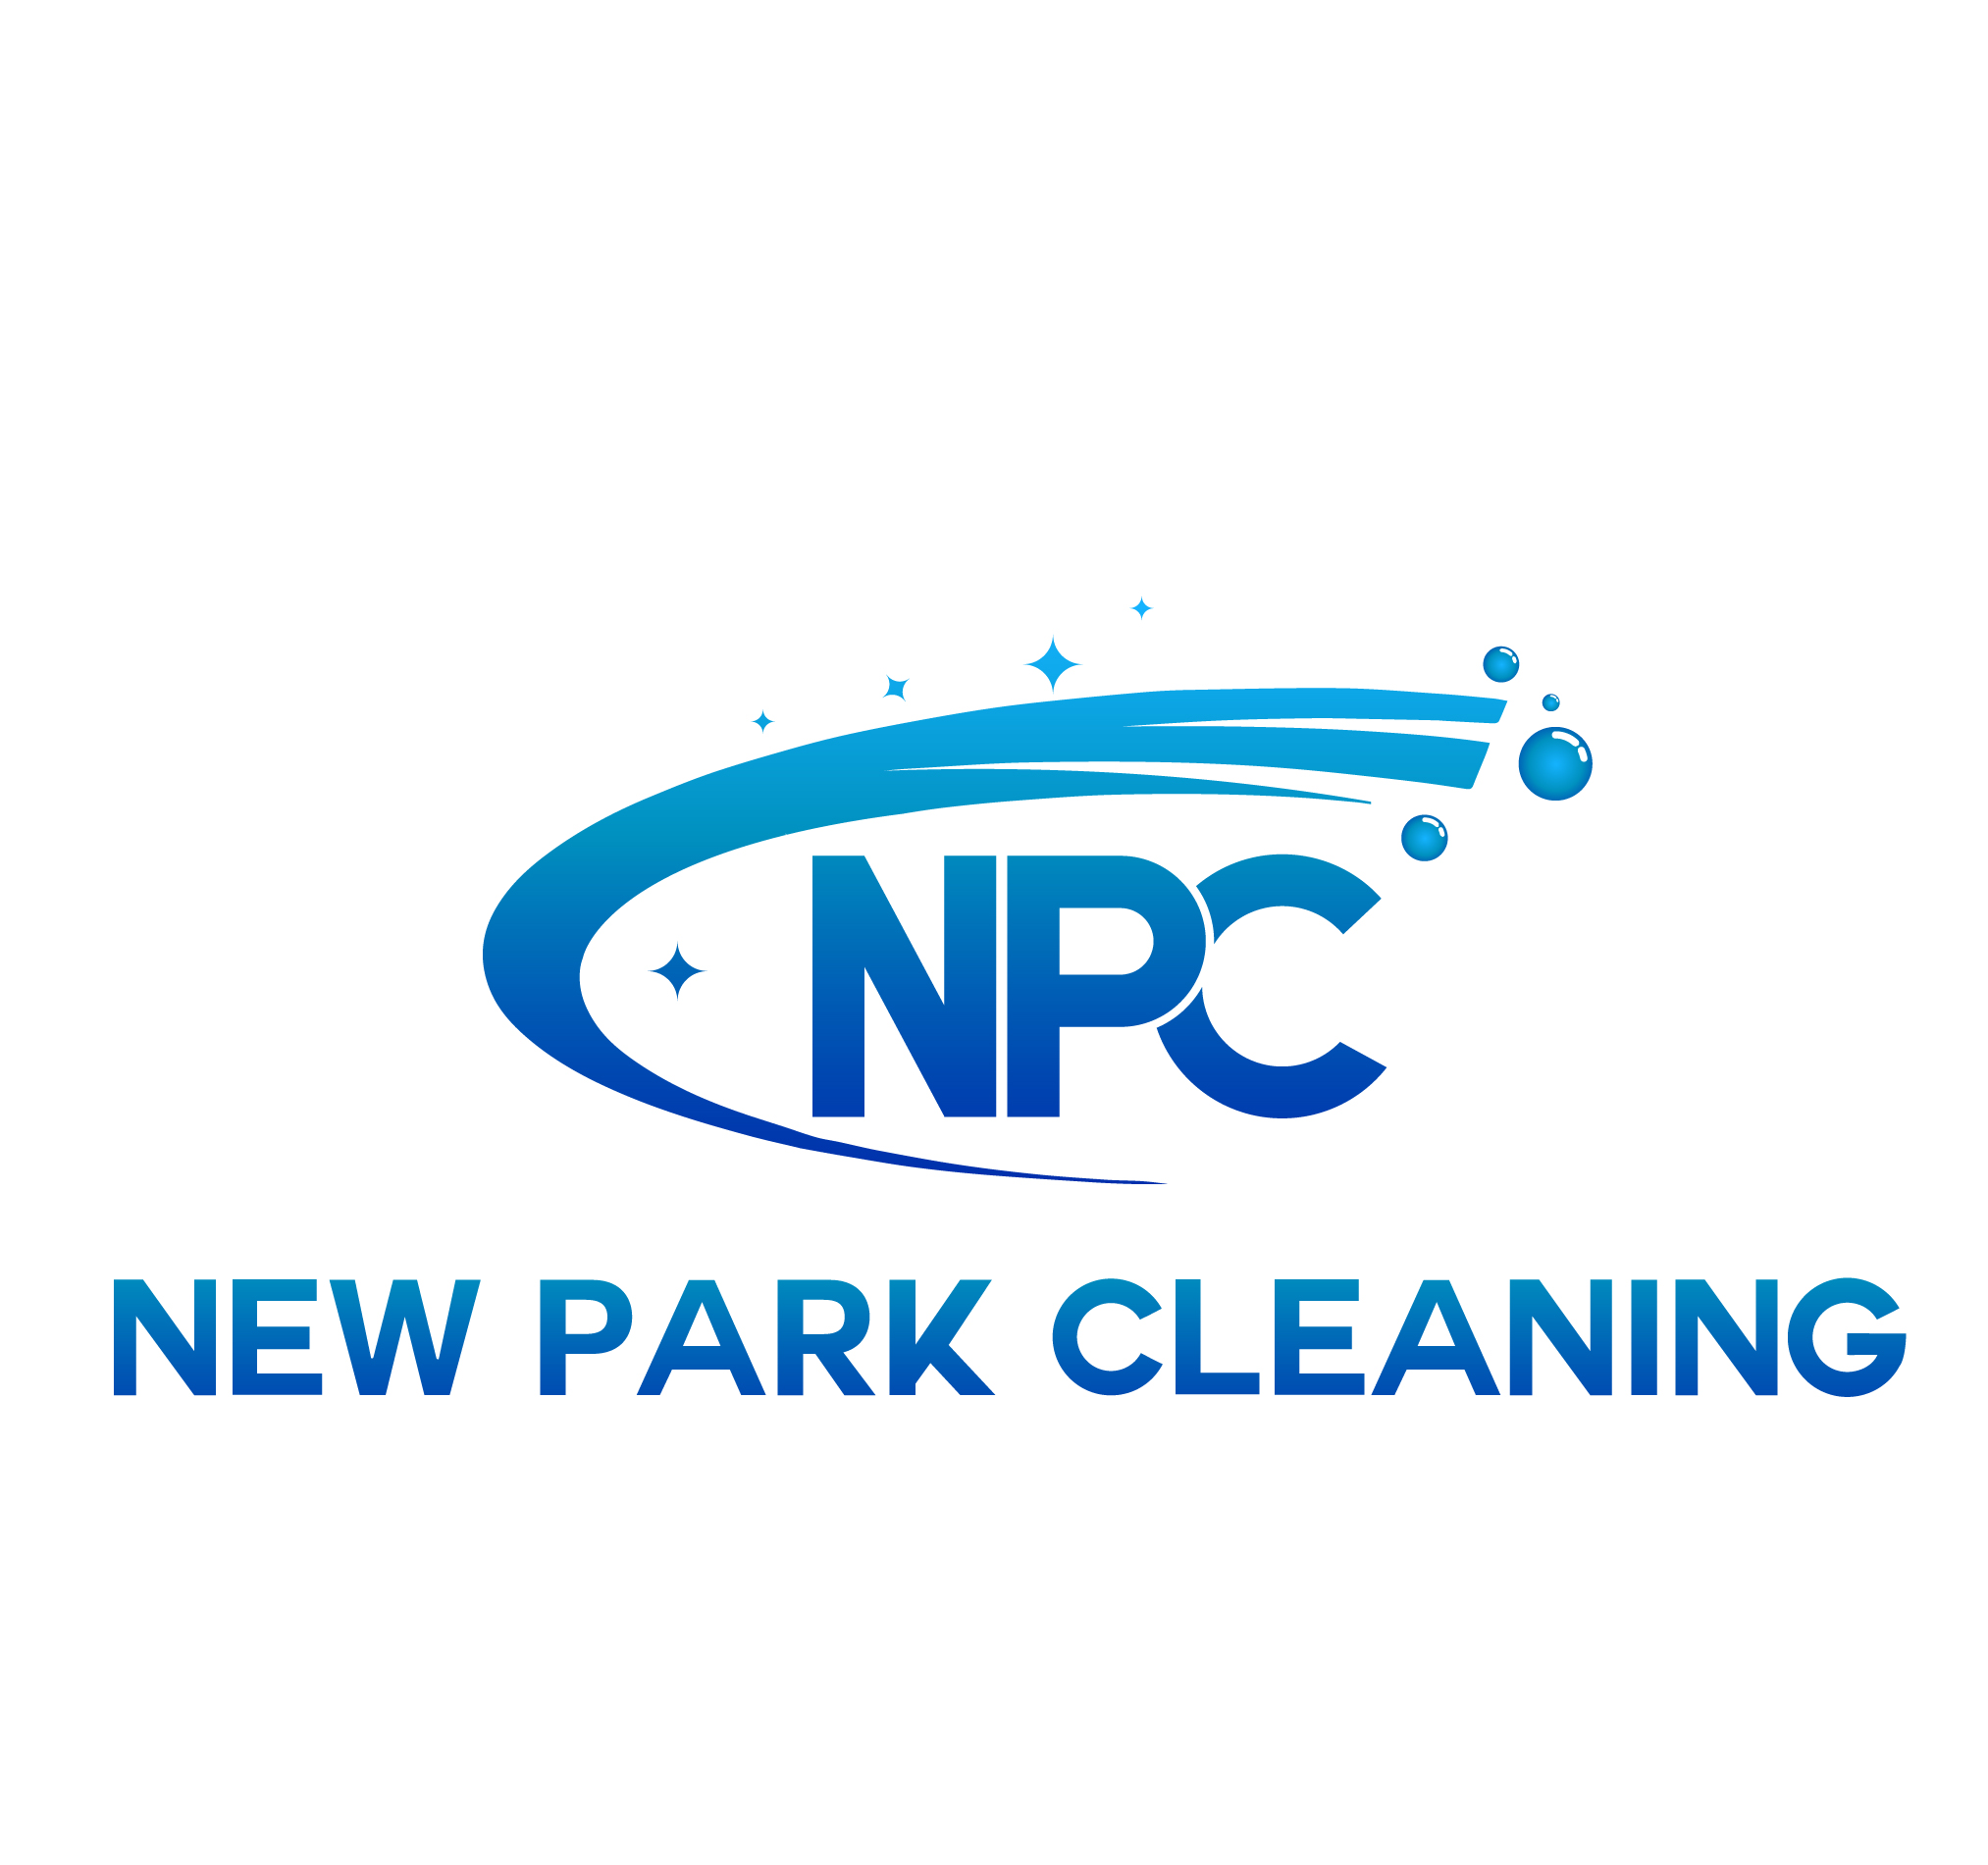 Benons Catering Introduces New Park Cleaning's Main Hub Right in the Heart of Grimsby on Cleethorpes Road